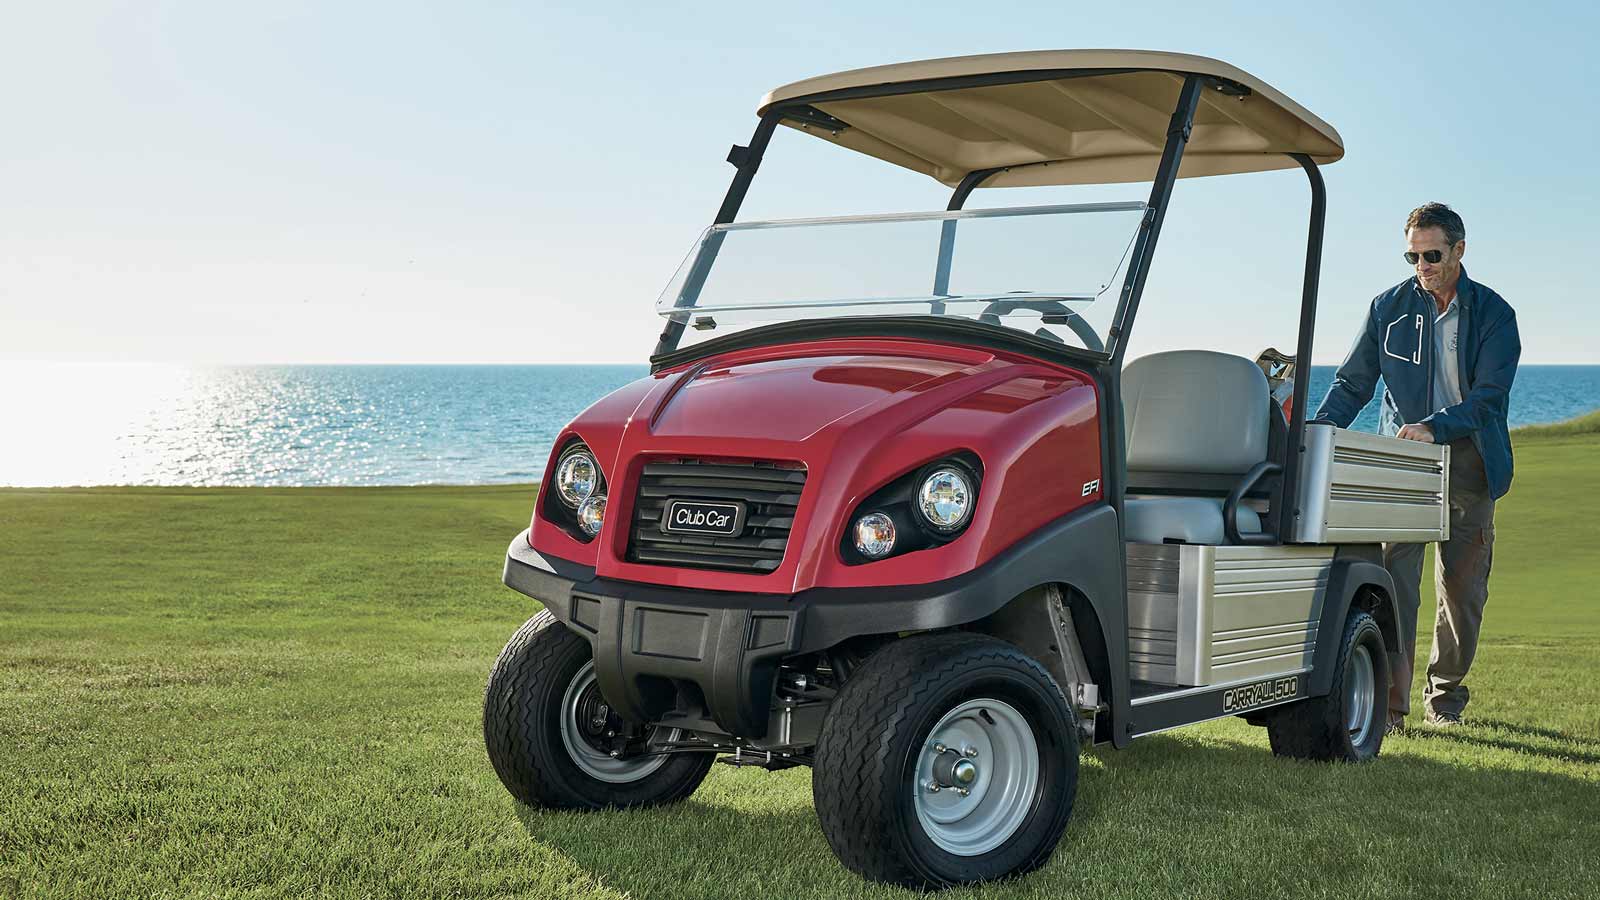 Golf course utility vehicle Carryall 500 turf utility vehicle on golf course